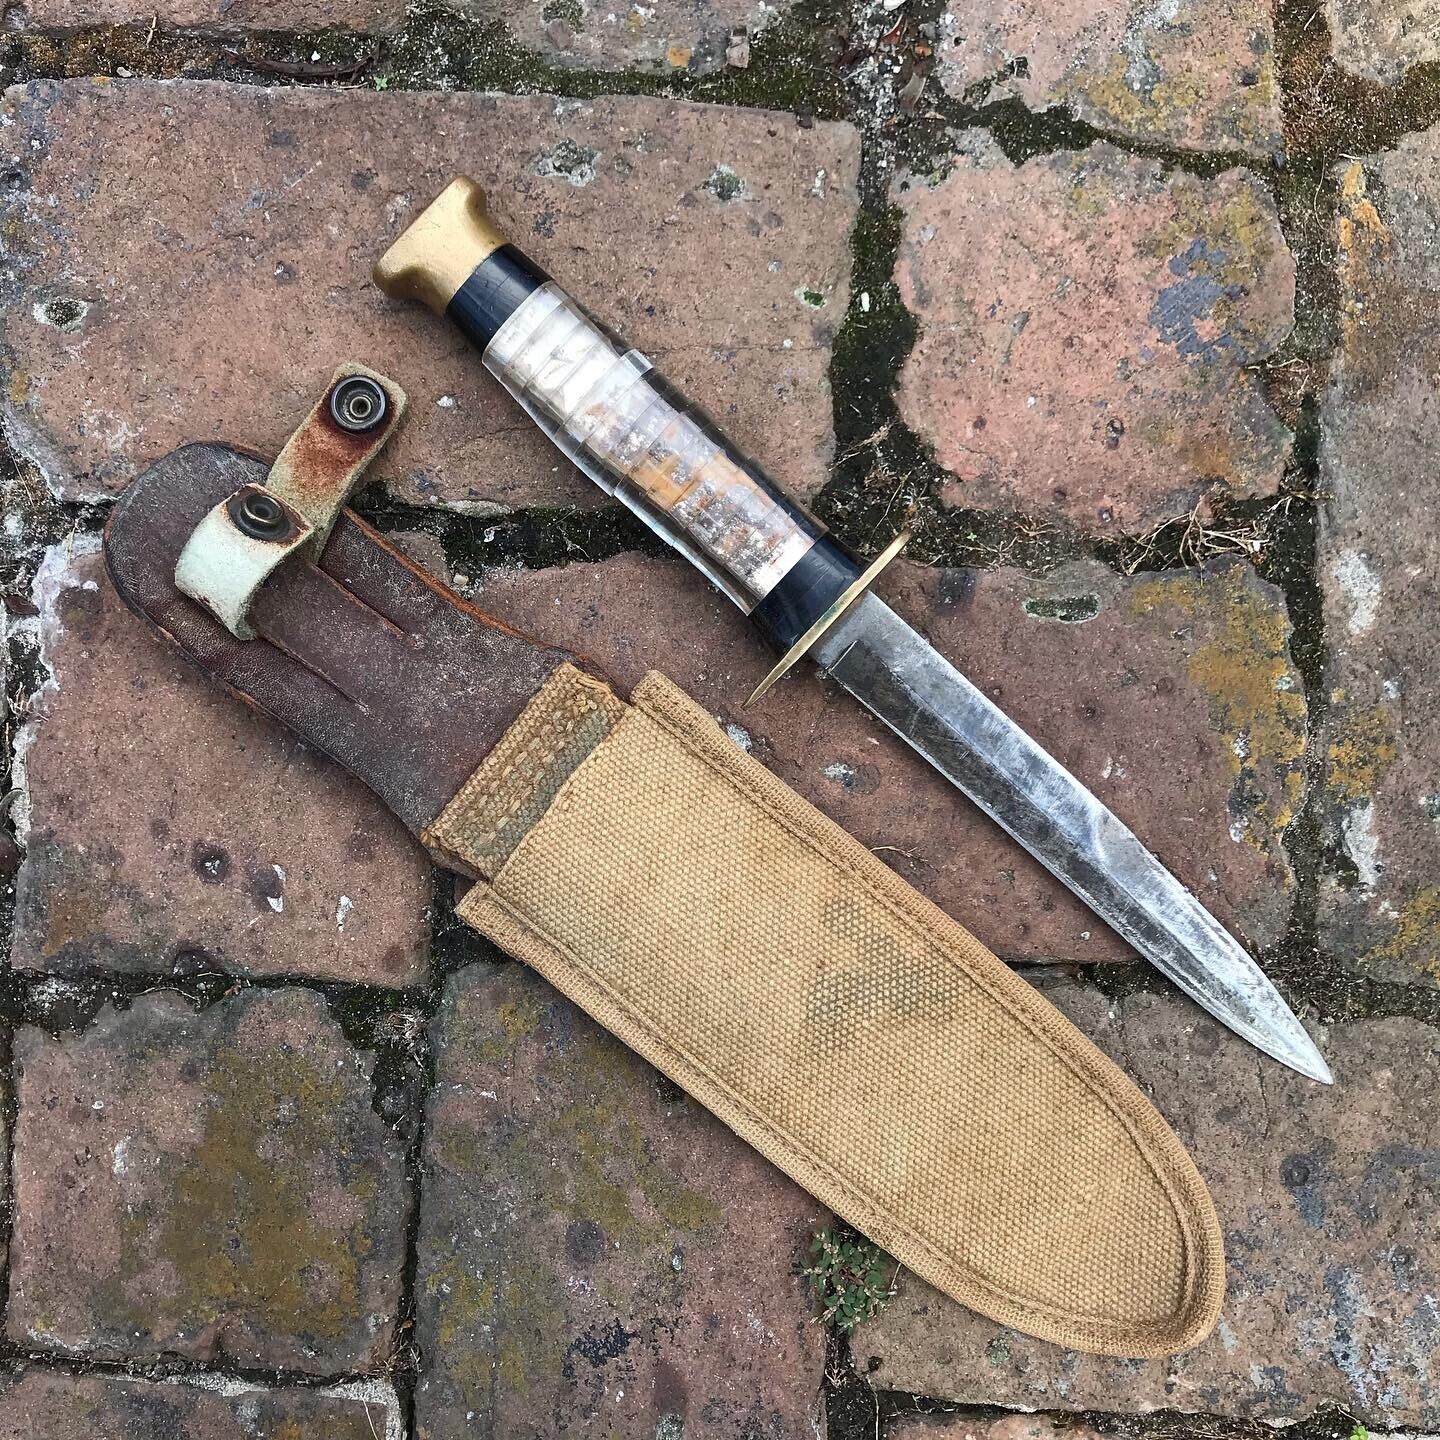 WWII USM3 paratrooper knife trench art grip